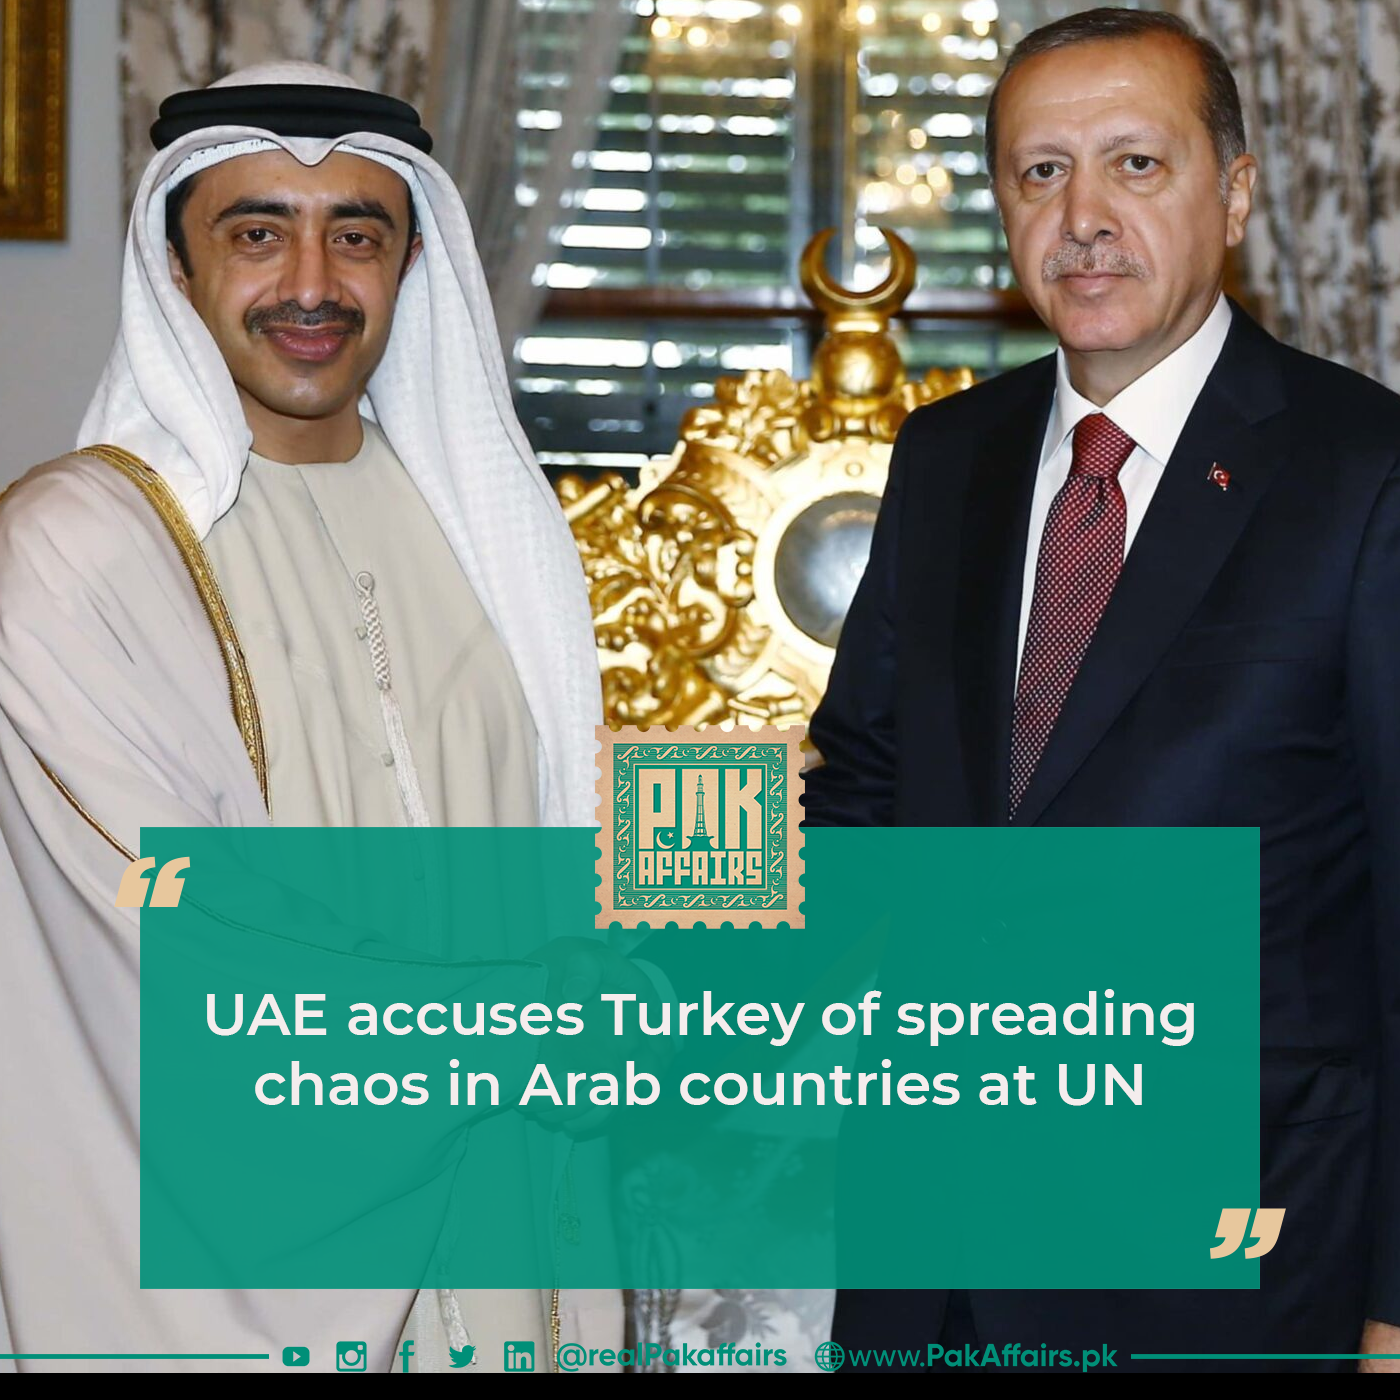 UAE accuses Turkey of spreading chaos in Arab countries